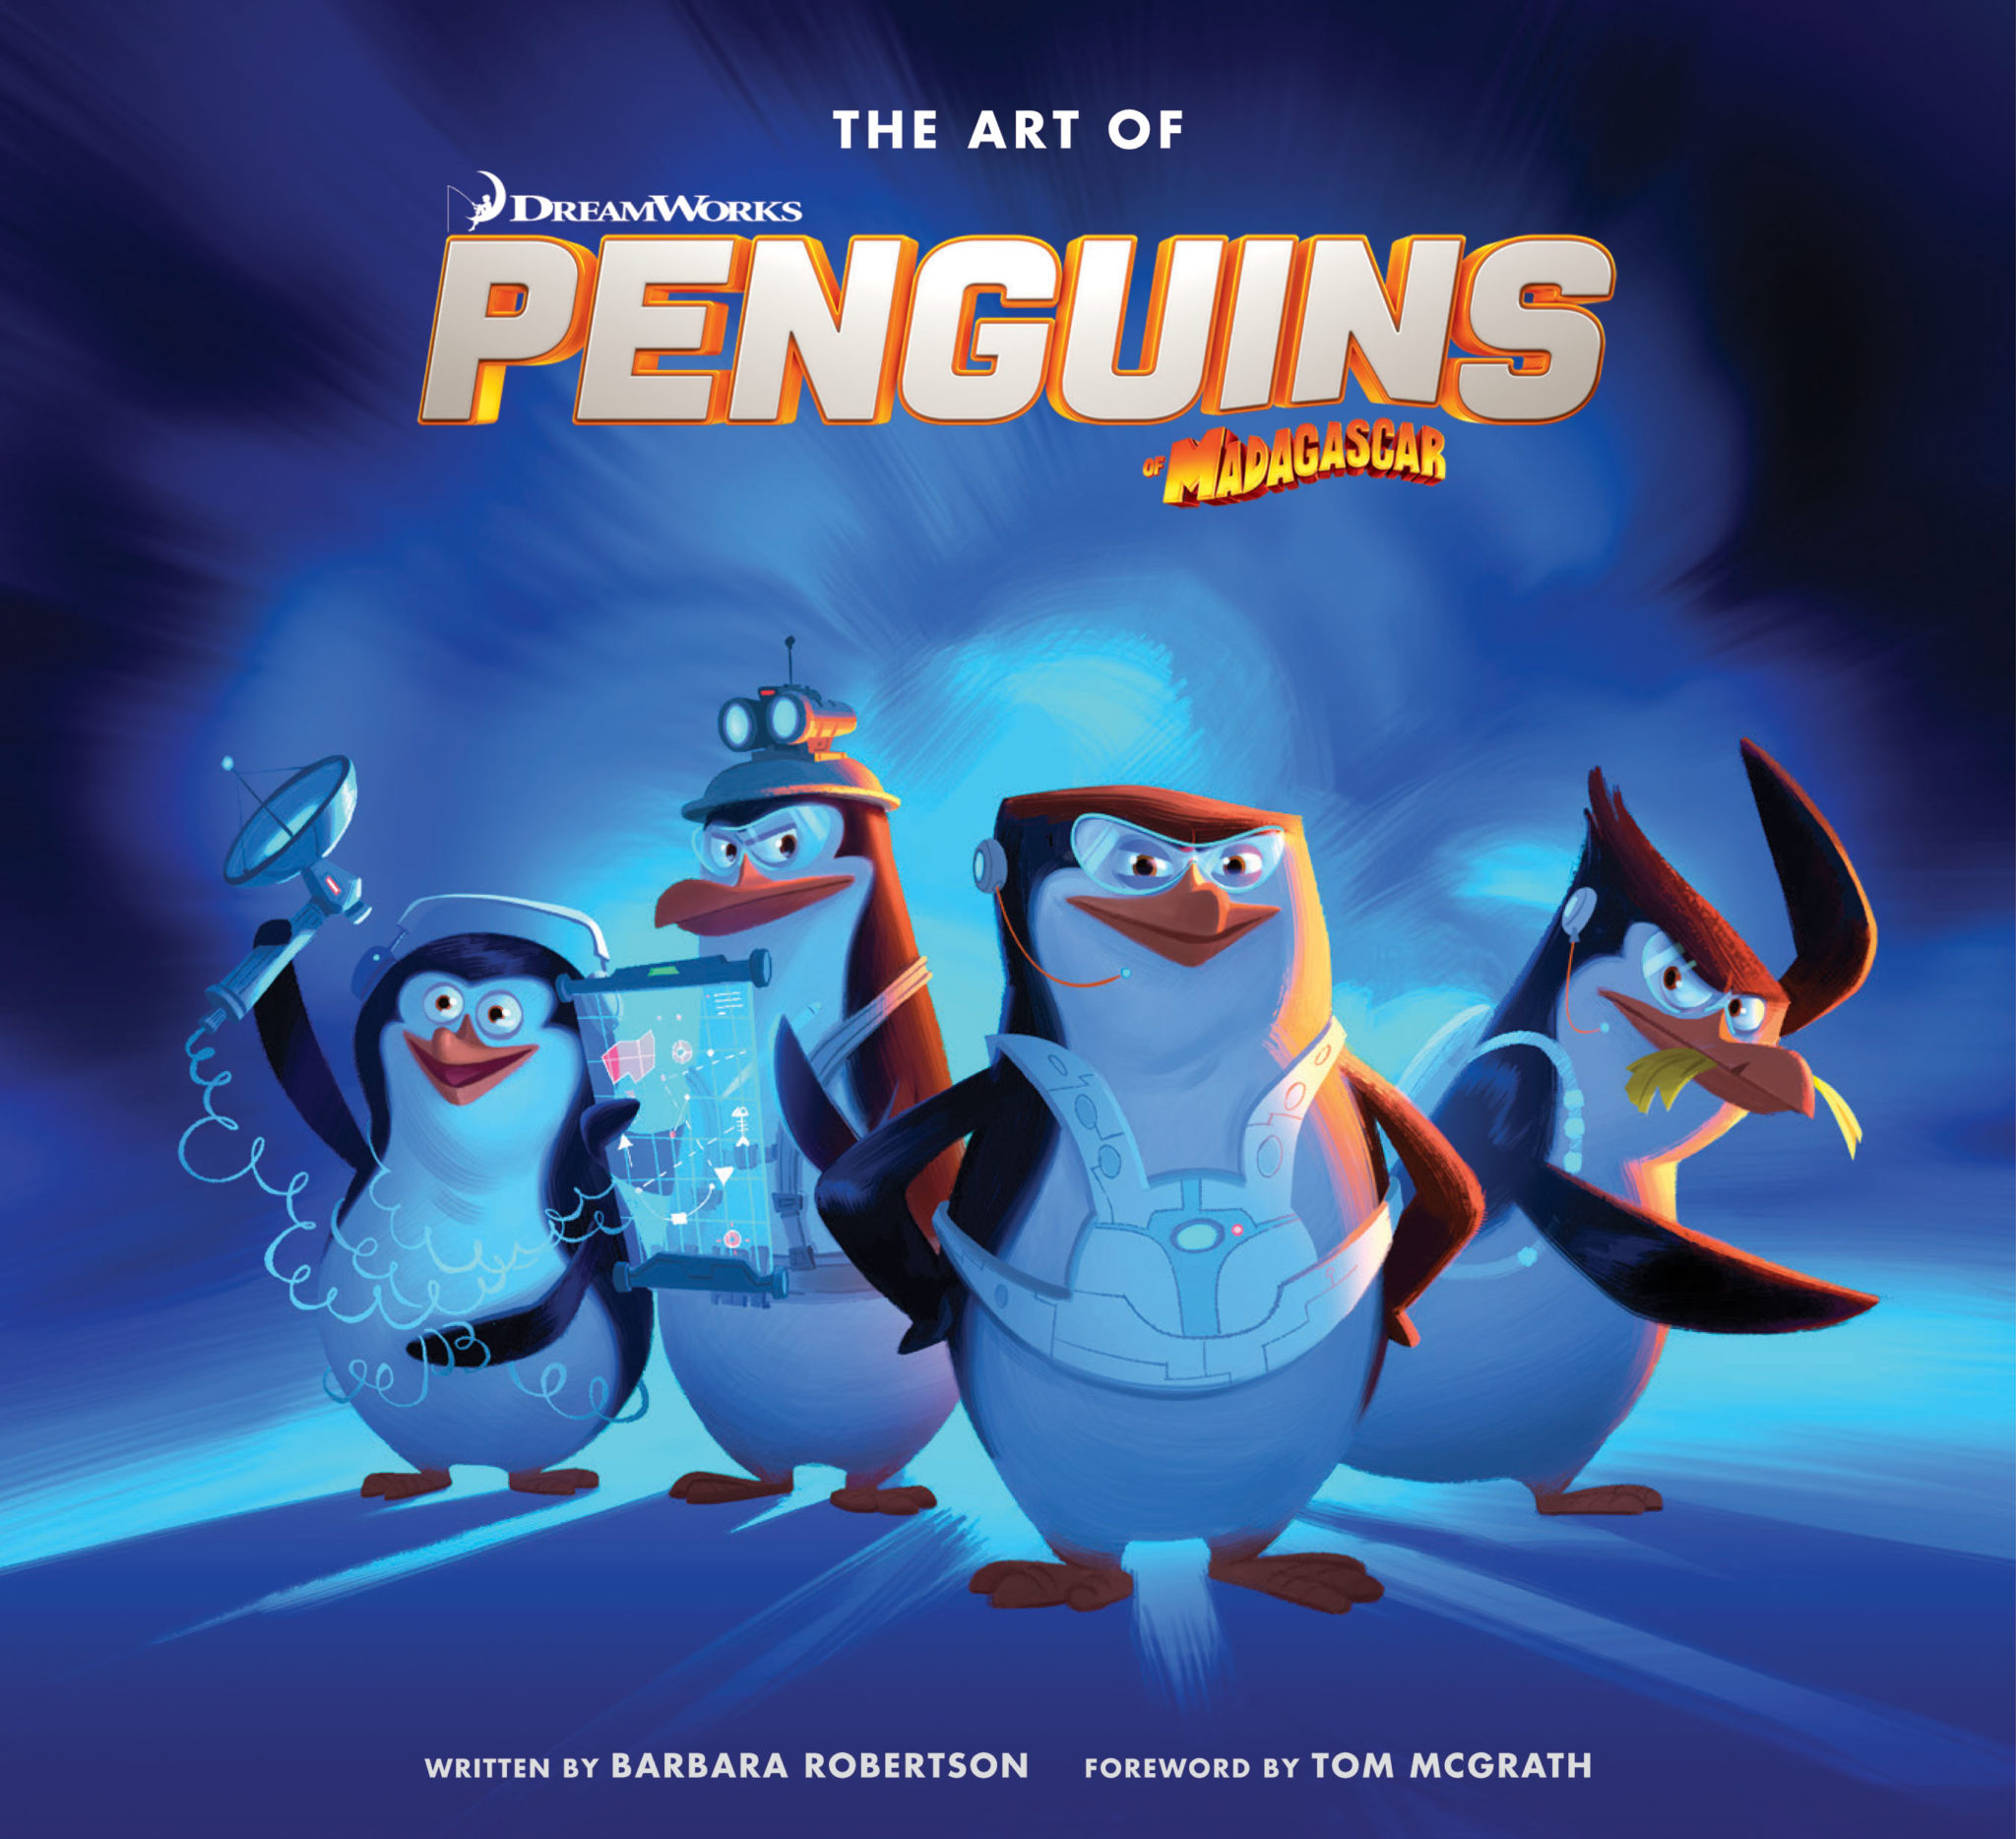 ART BOOK REVIEW] The Art of Penguins of Madagascar - Rotoscopers